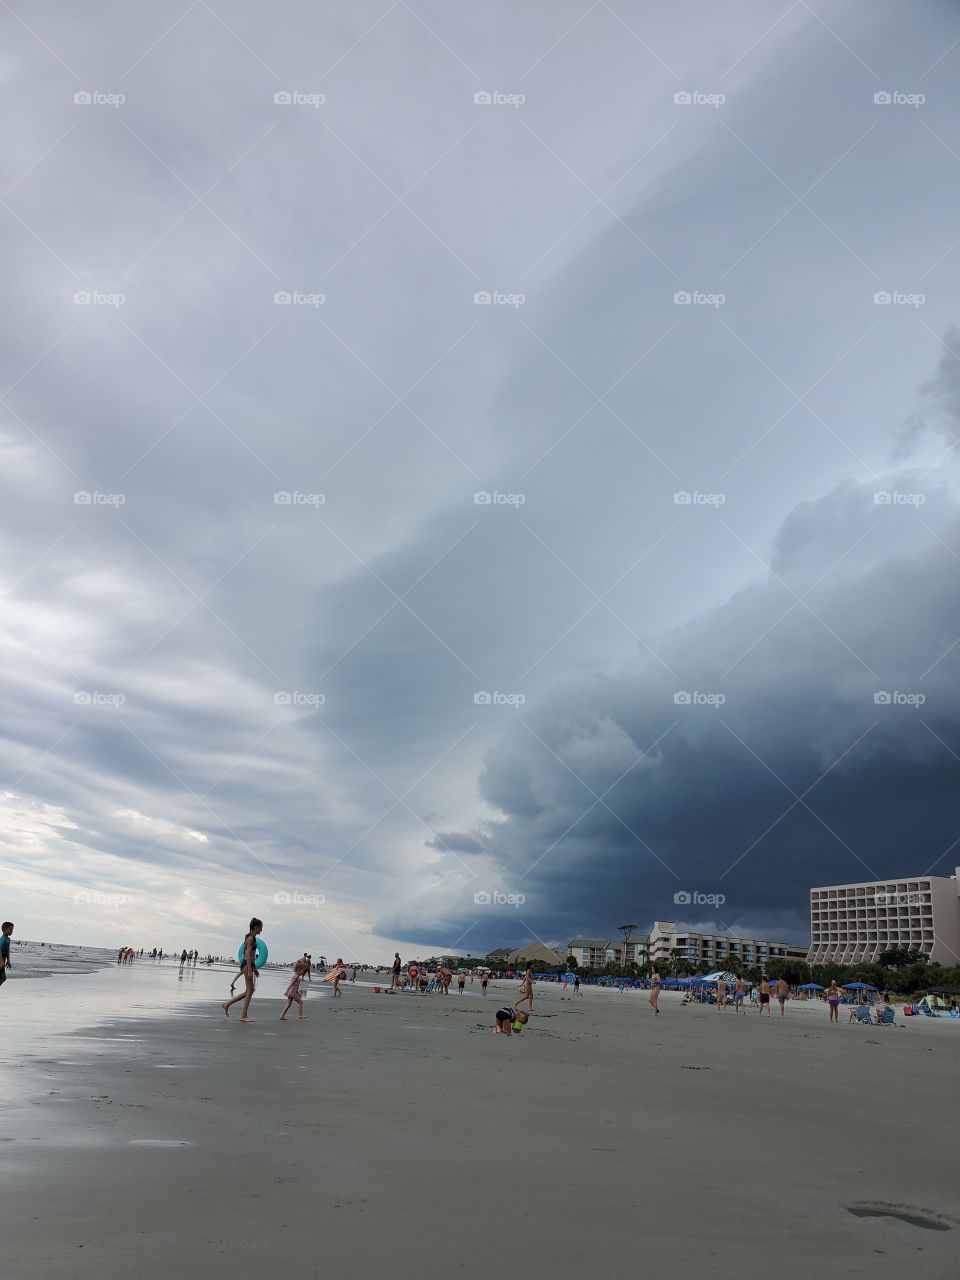 Mother Nature invades the beach day